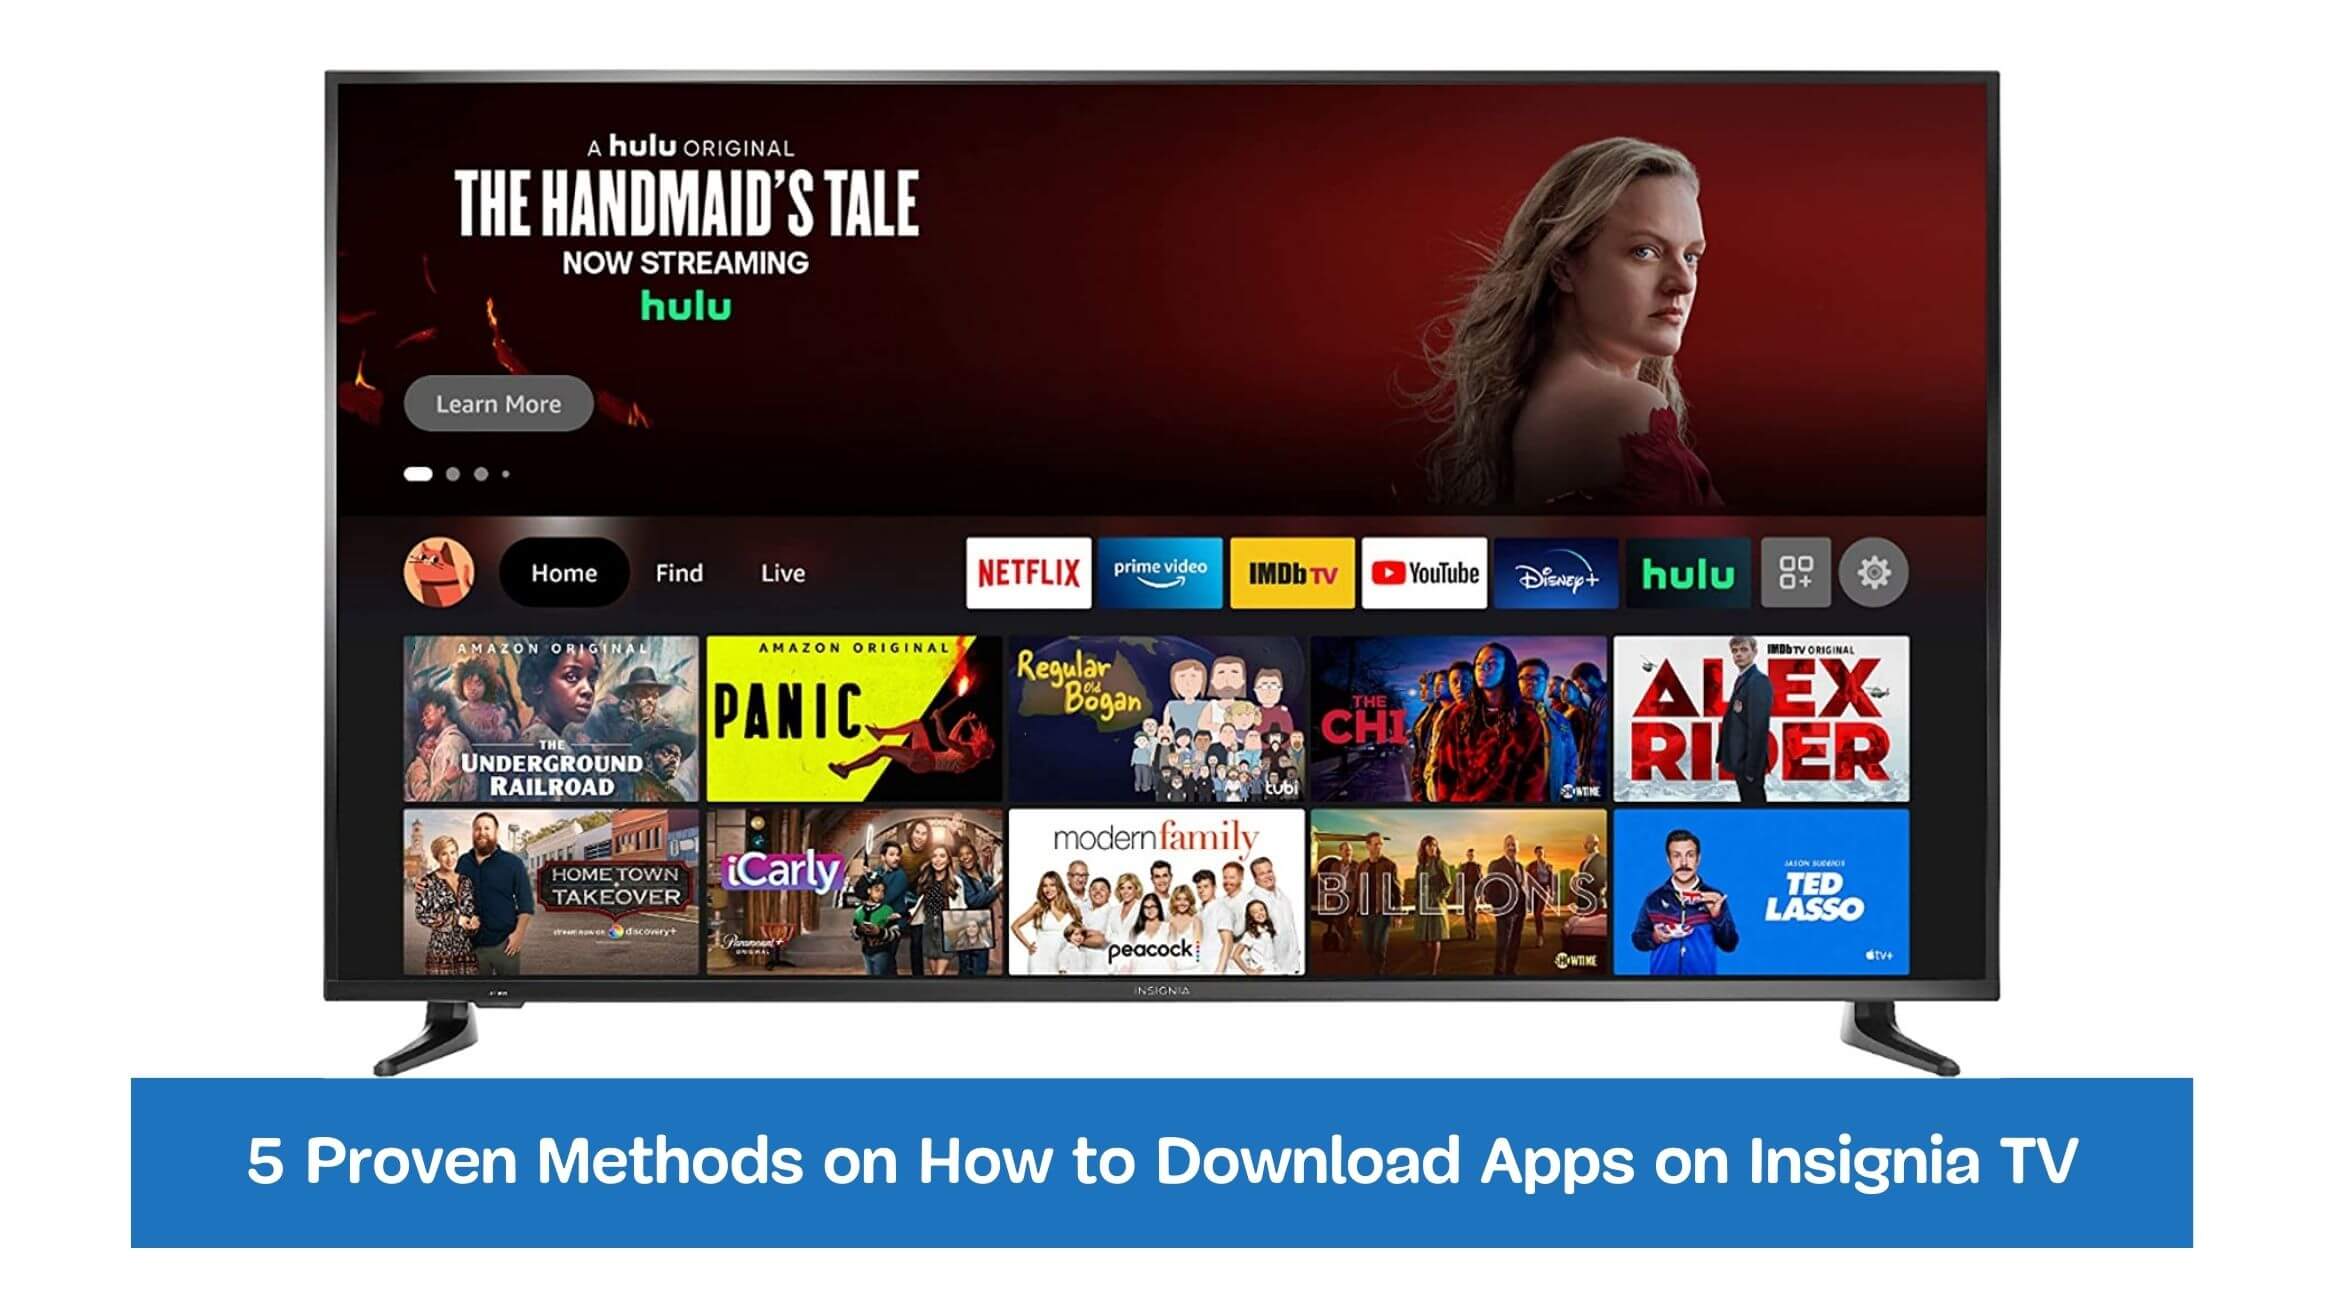 5 Proven Methods on How to Download Apps on Insignia TV